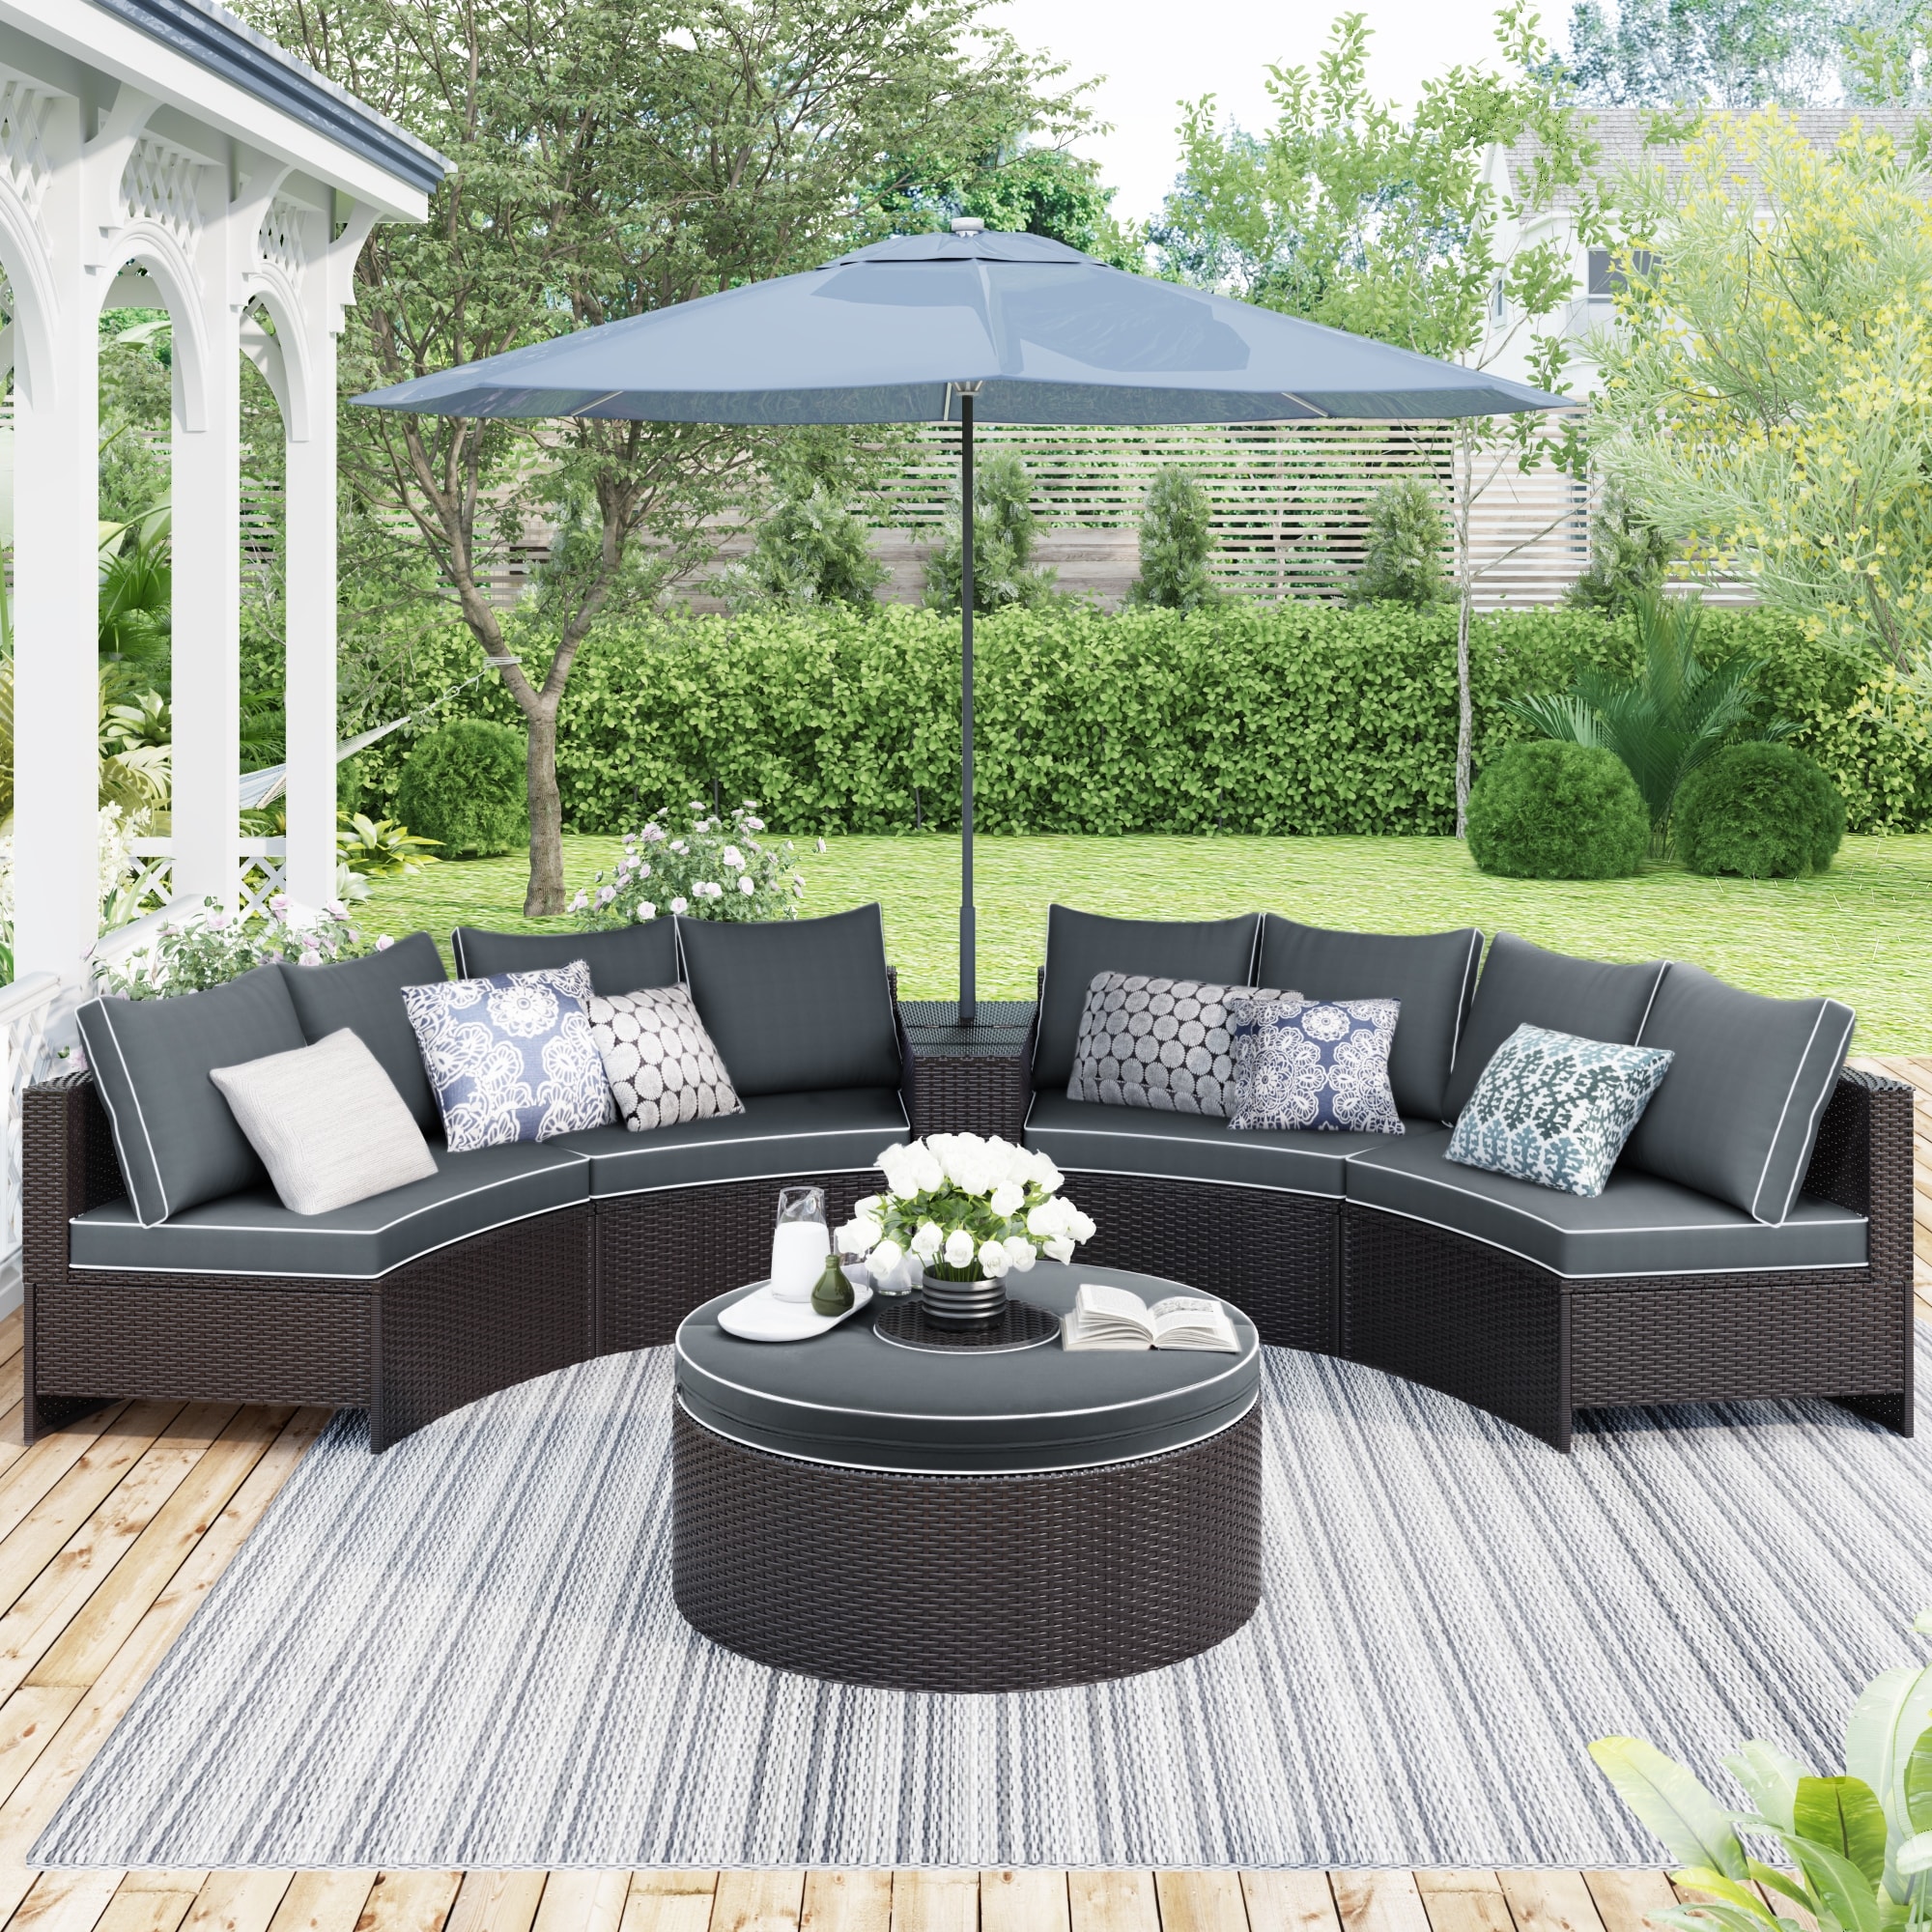 Outdoor Rattan Patio Half Round Sofa Set With Umbrella Storage Side Table And Multifunctional Round Table